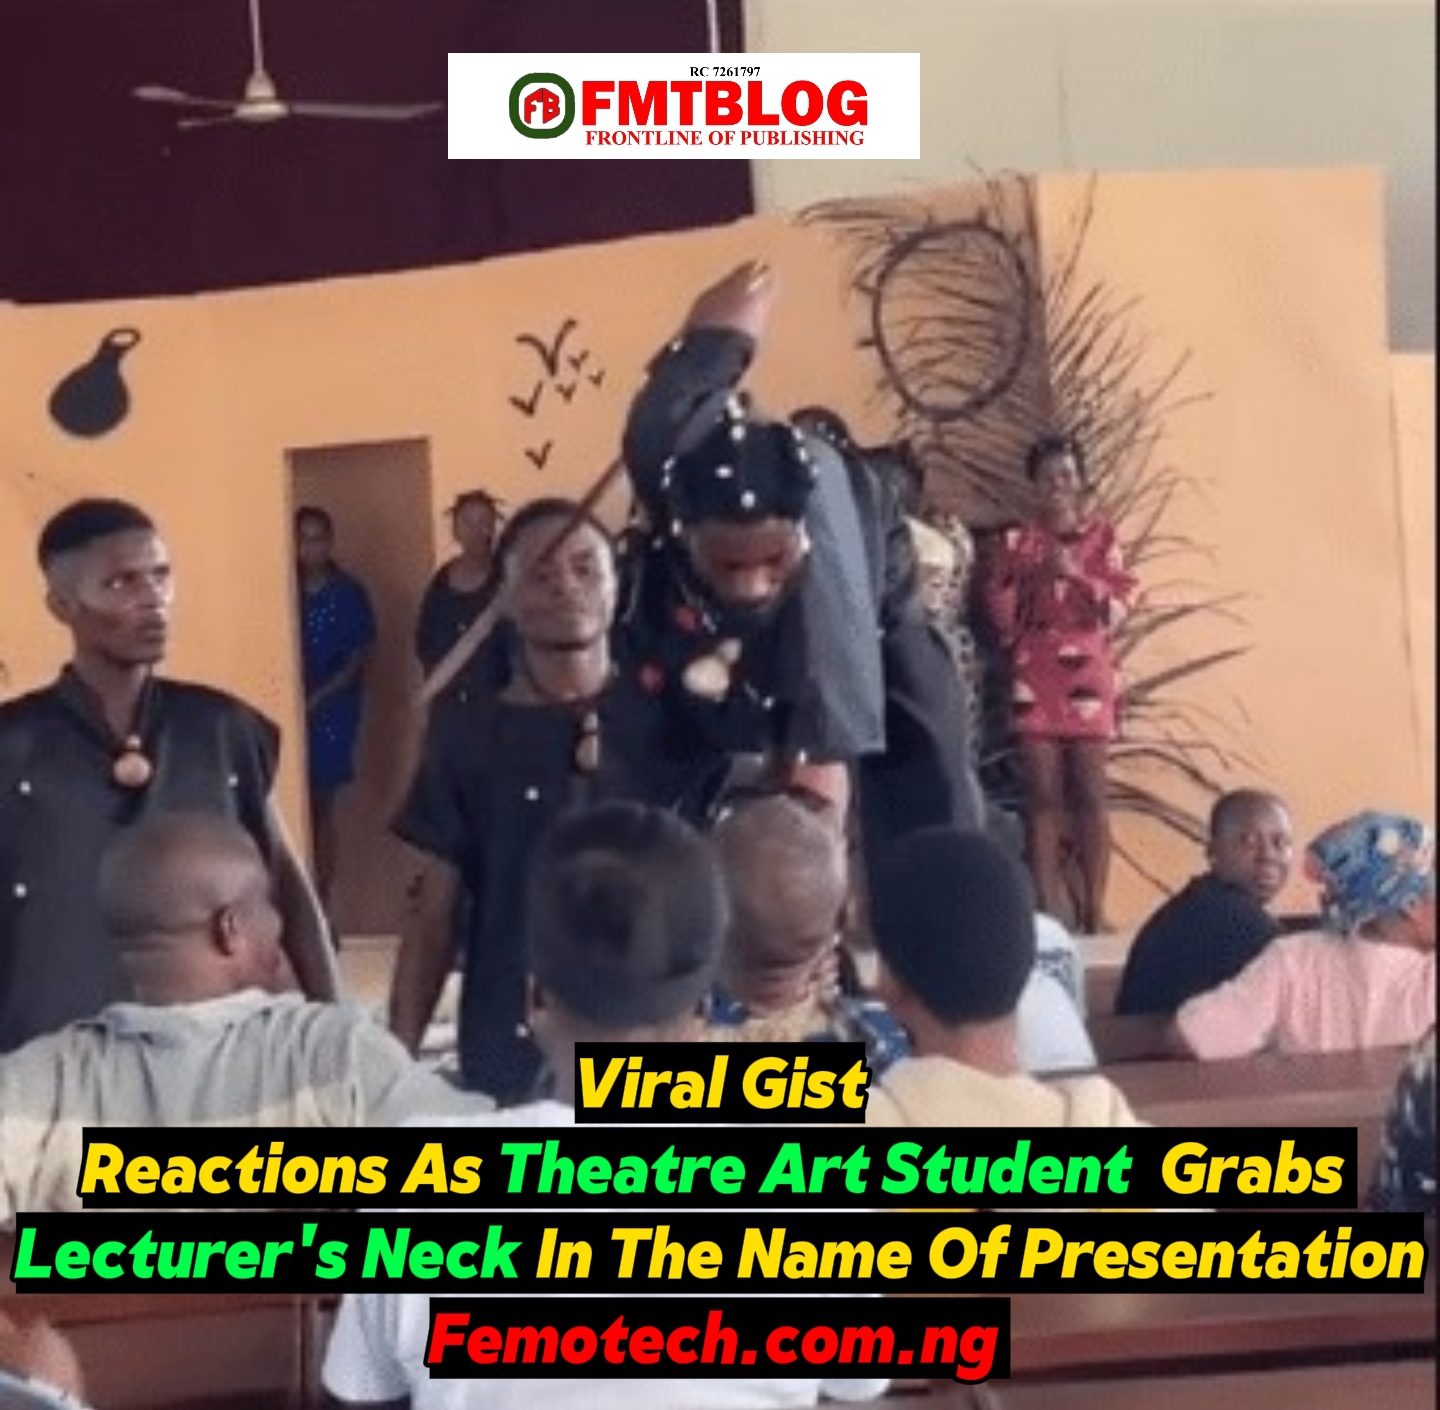 Reactions As Theatre Art Student Grabs Lecturer’s Neck In The Name Of Presentation (Video)